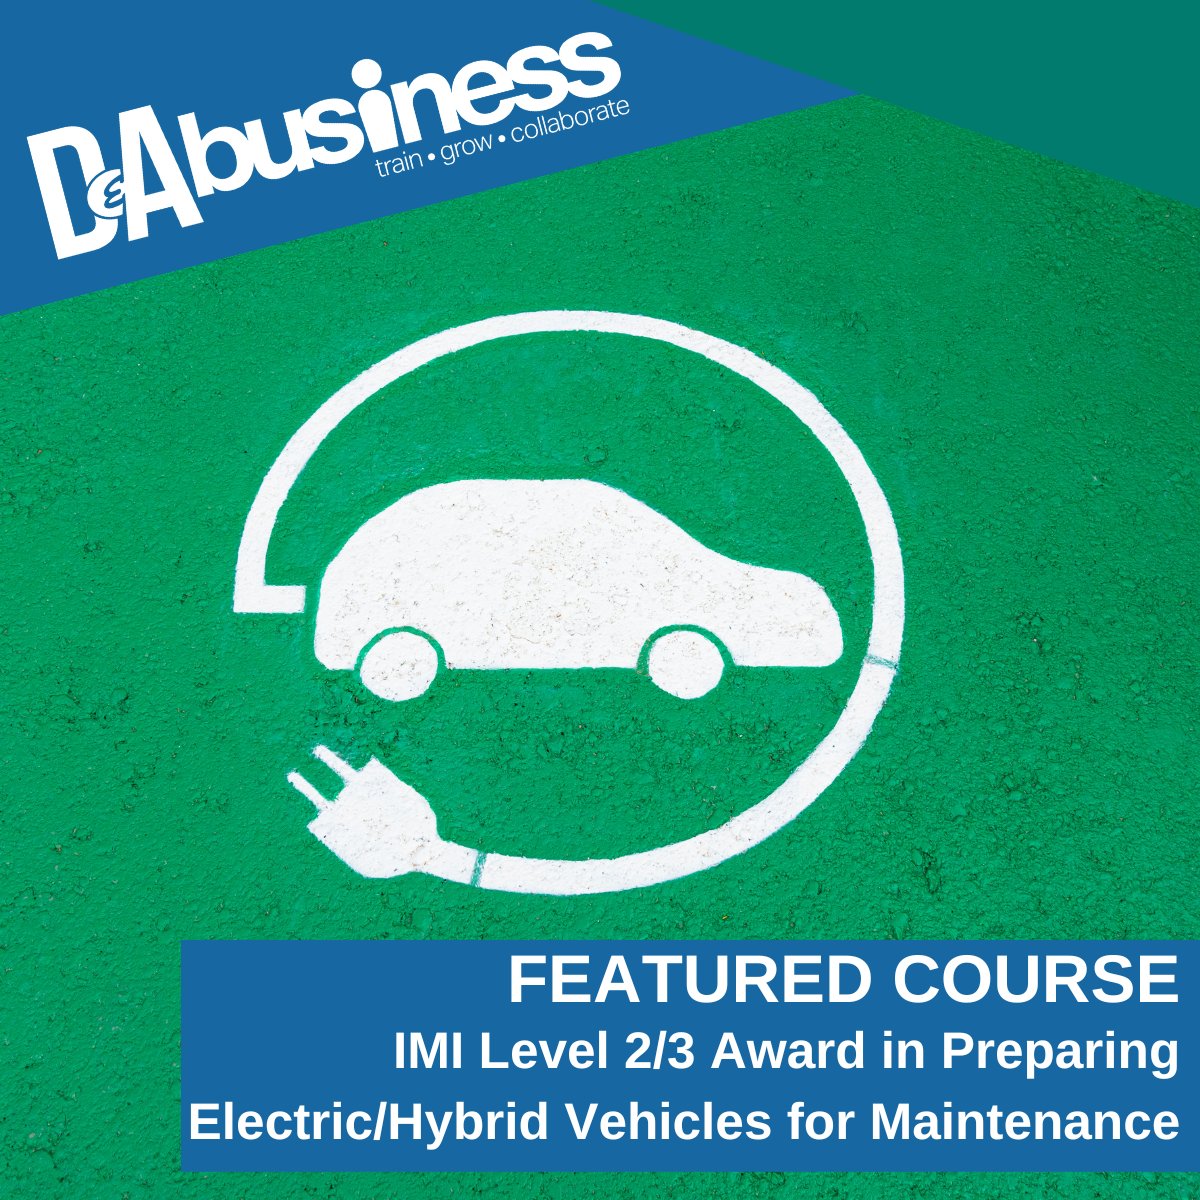 ⭐Featured Course ⭐ Looking to work with Electric Vehicles or perhaps your business already offers this service? 🤔🚘 This course is coming up on 19th October, don't miss out, book your place today! pulse.ly/pvhnmwr6mq #DABusiness #ElectricVehicles #Sustainability